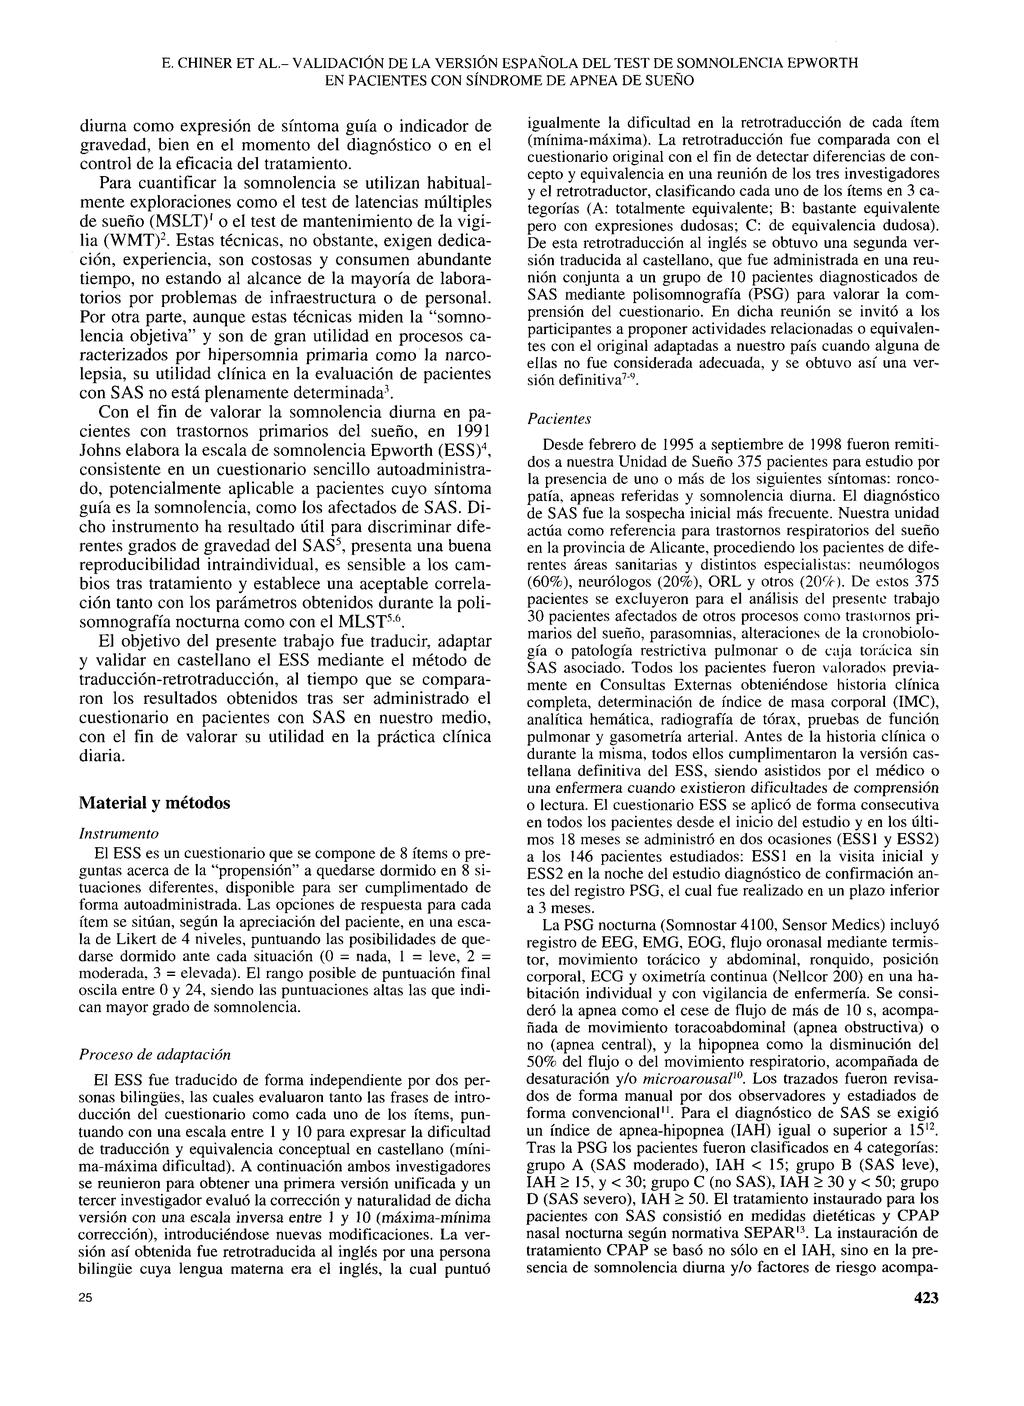 Document downloaded from http://www.elsevier.es, day 27/09/207. This copy is for personal use. ny transmission of this document by any media or format is strictly prohibited. E.